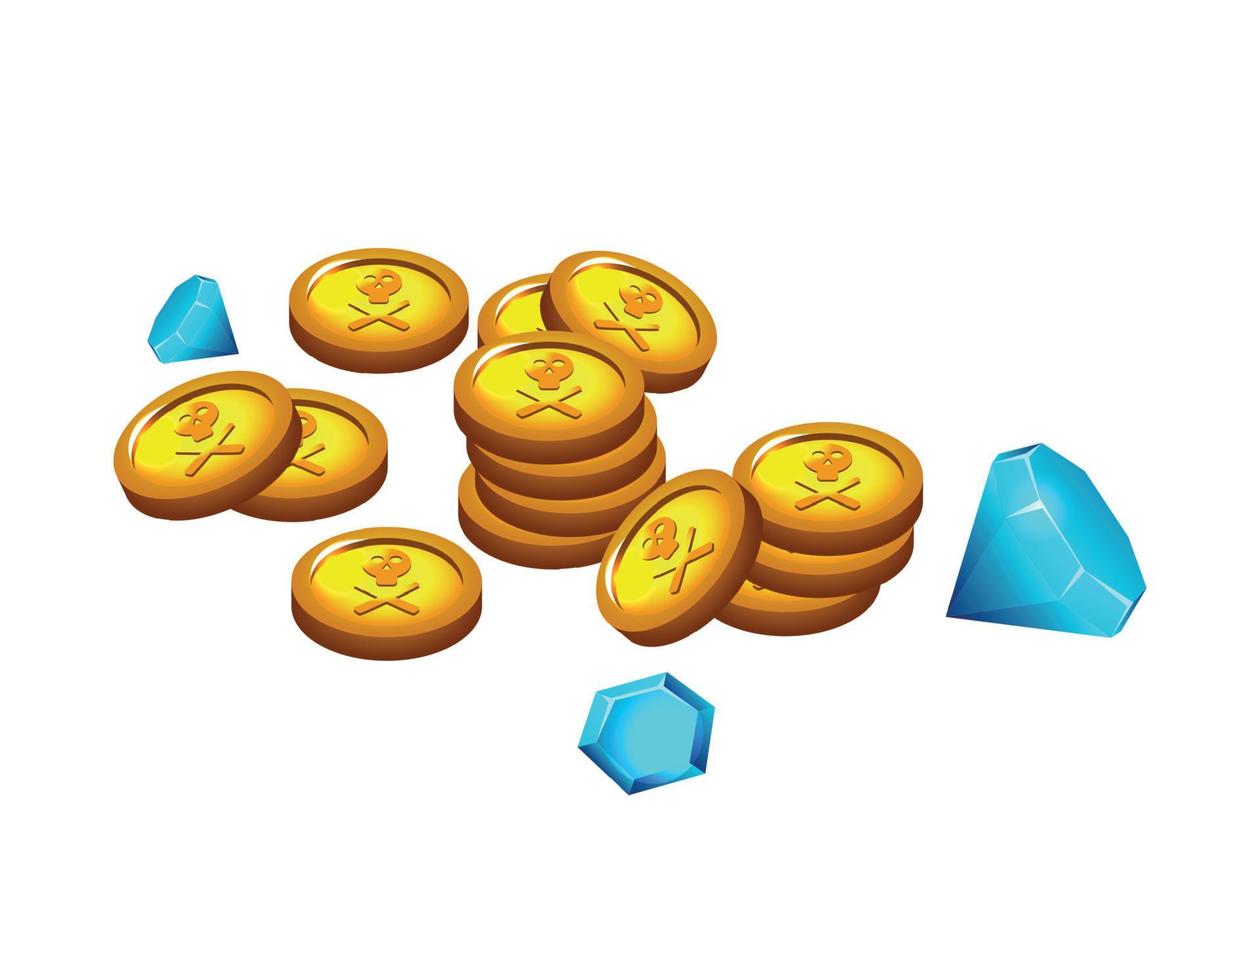 Coins And Gems Composition vector